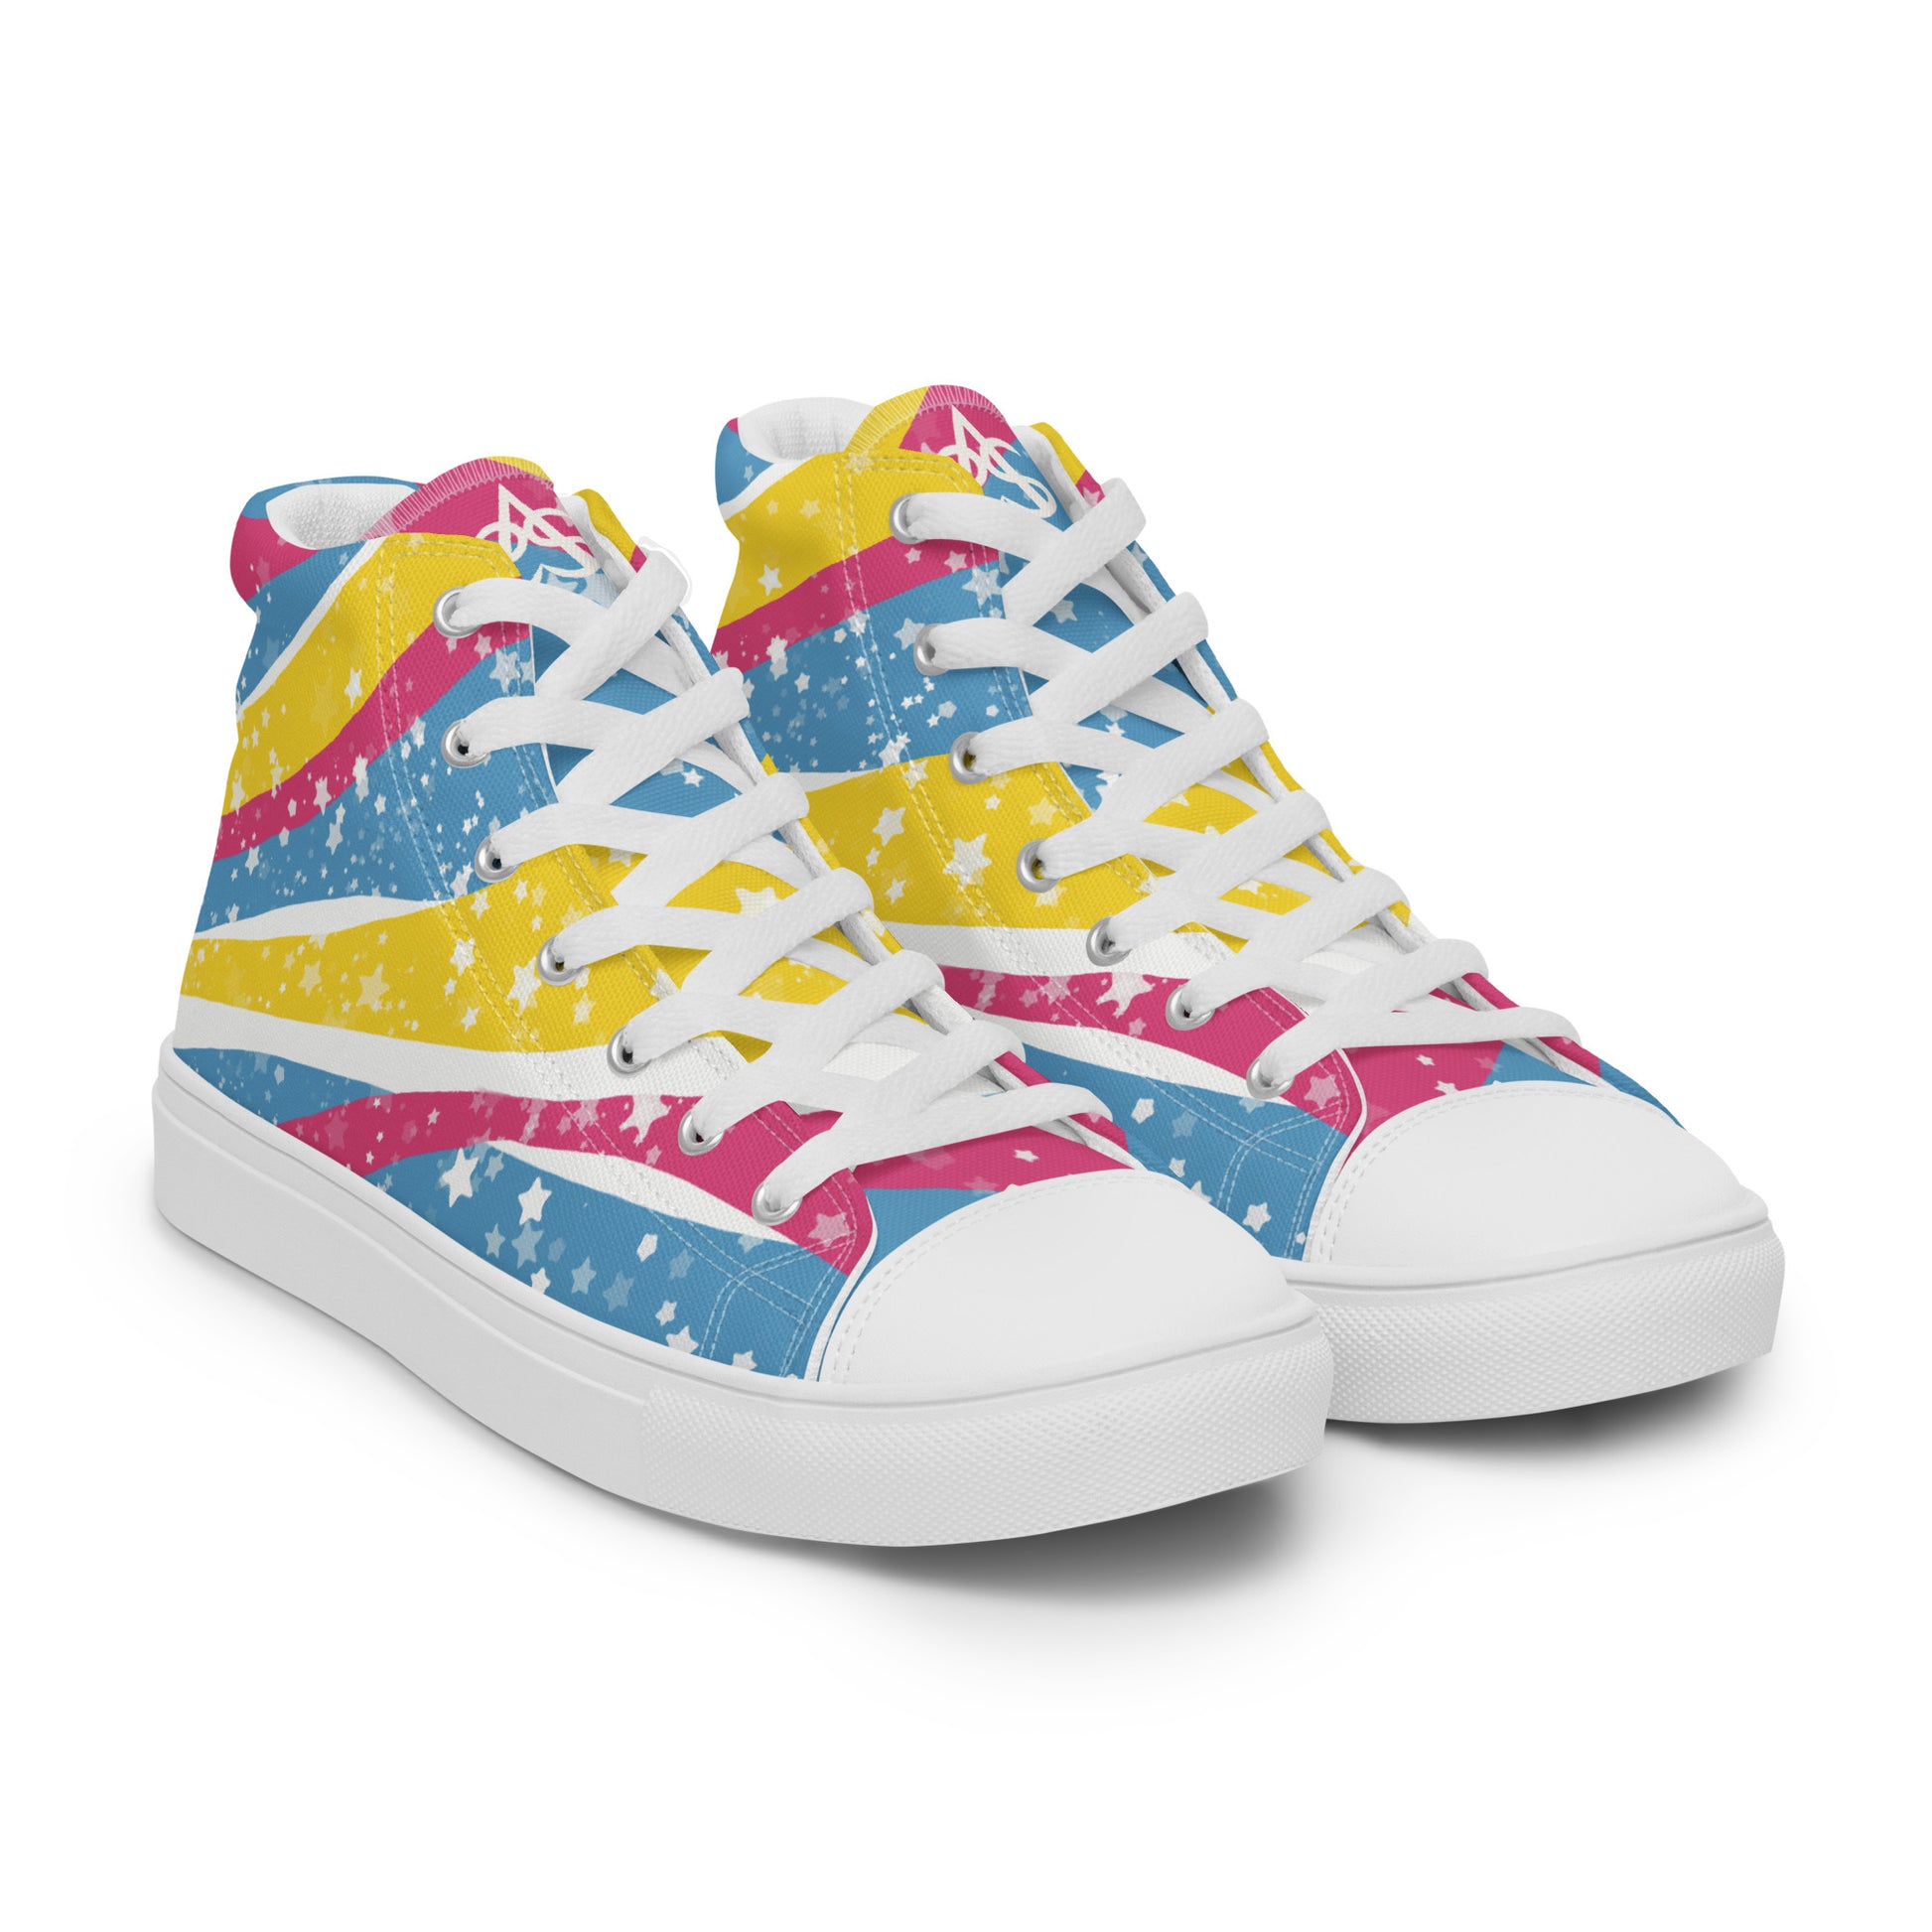 Right front view: a pair of high top shoes with pink, yellow, and blue ribbons that get larger from heel to laces, white stars, and the Aras Sivad logo on the tongue.